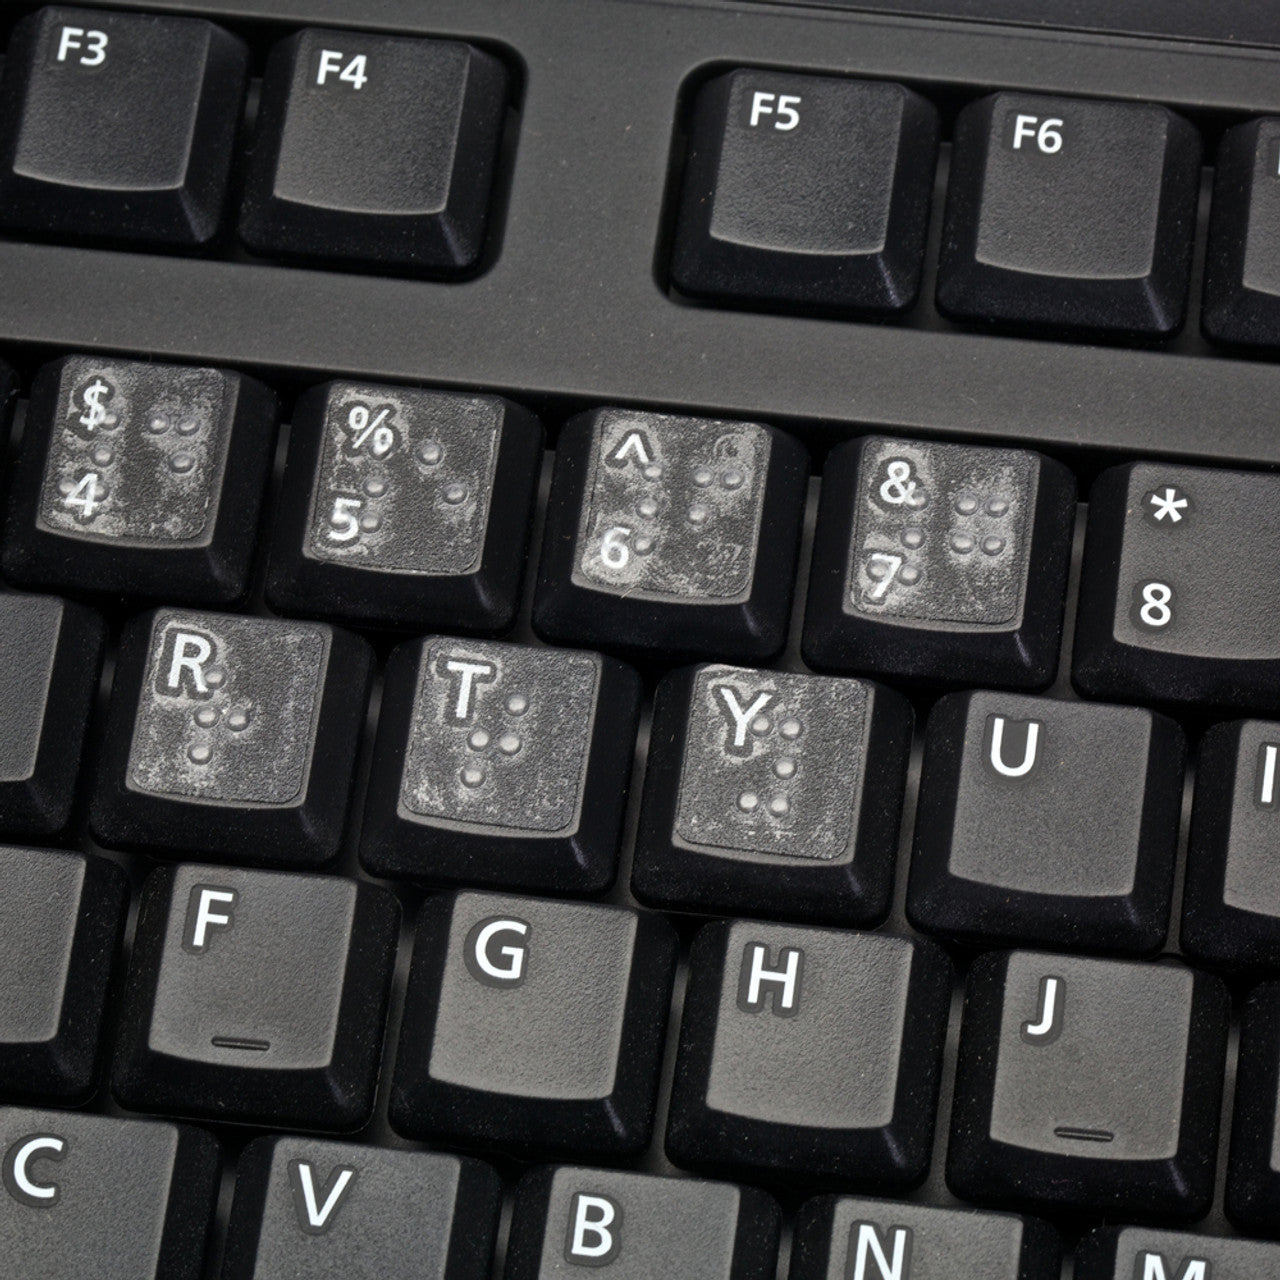 The Transparent Braille Keyboard Stickers are designed with transparent material and features Braille symbols corresponding to each key on the keyboard. 